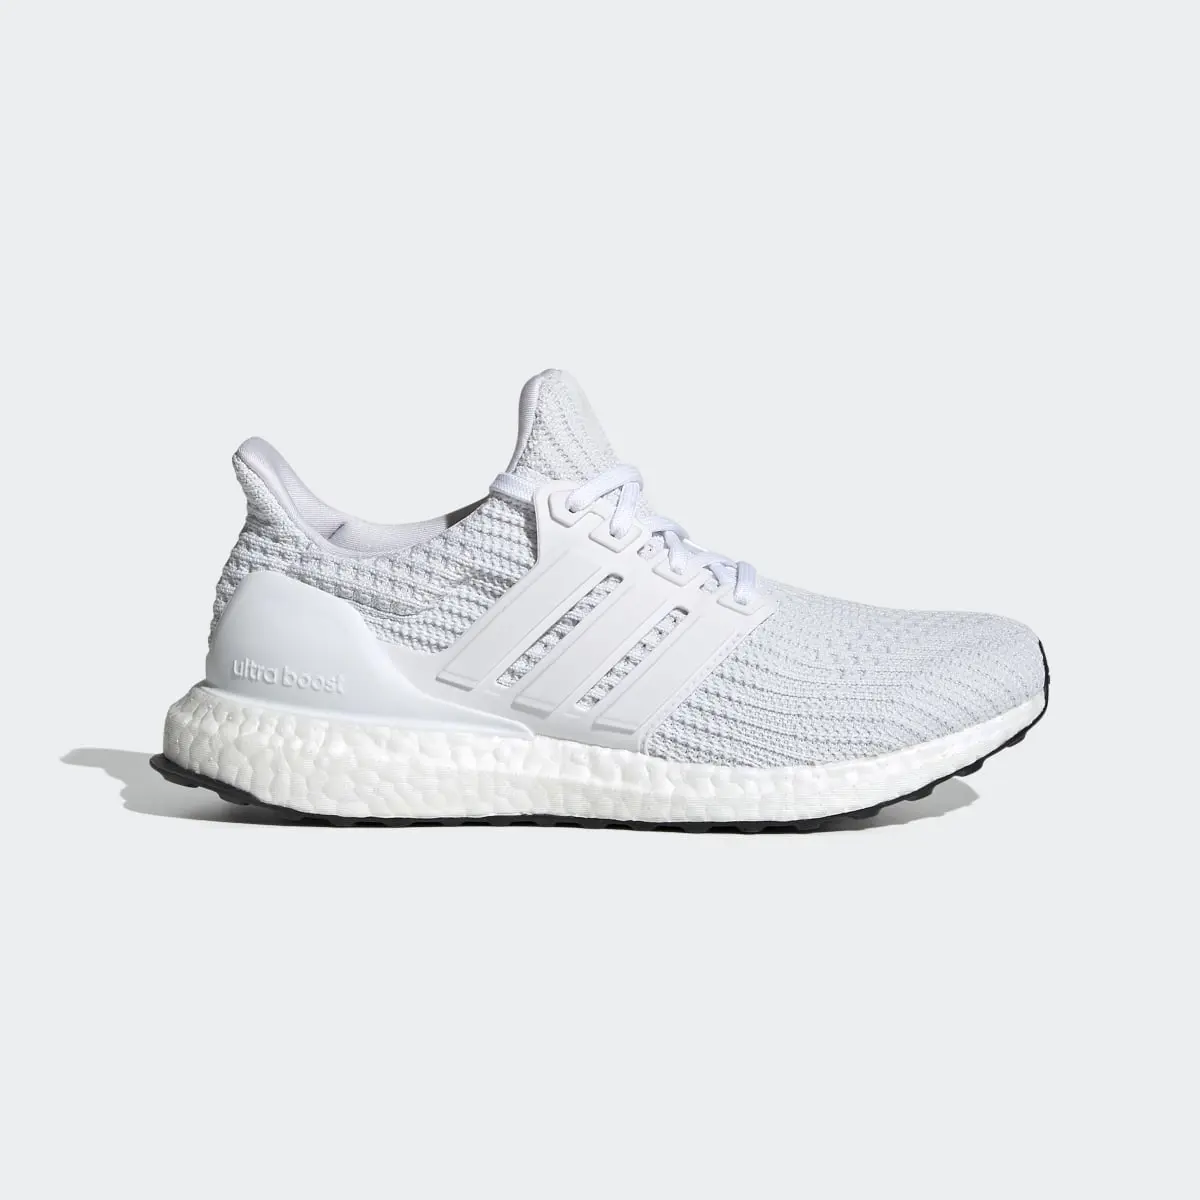 Adidas Ultraboost 4.0 DNA Shoes. 2